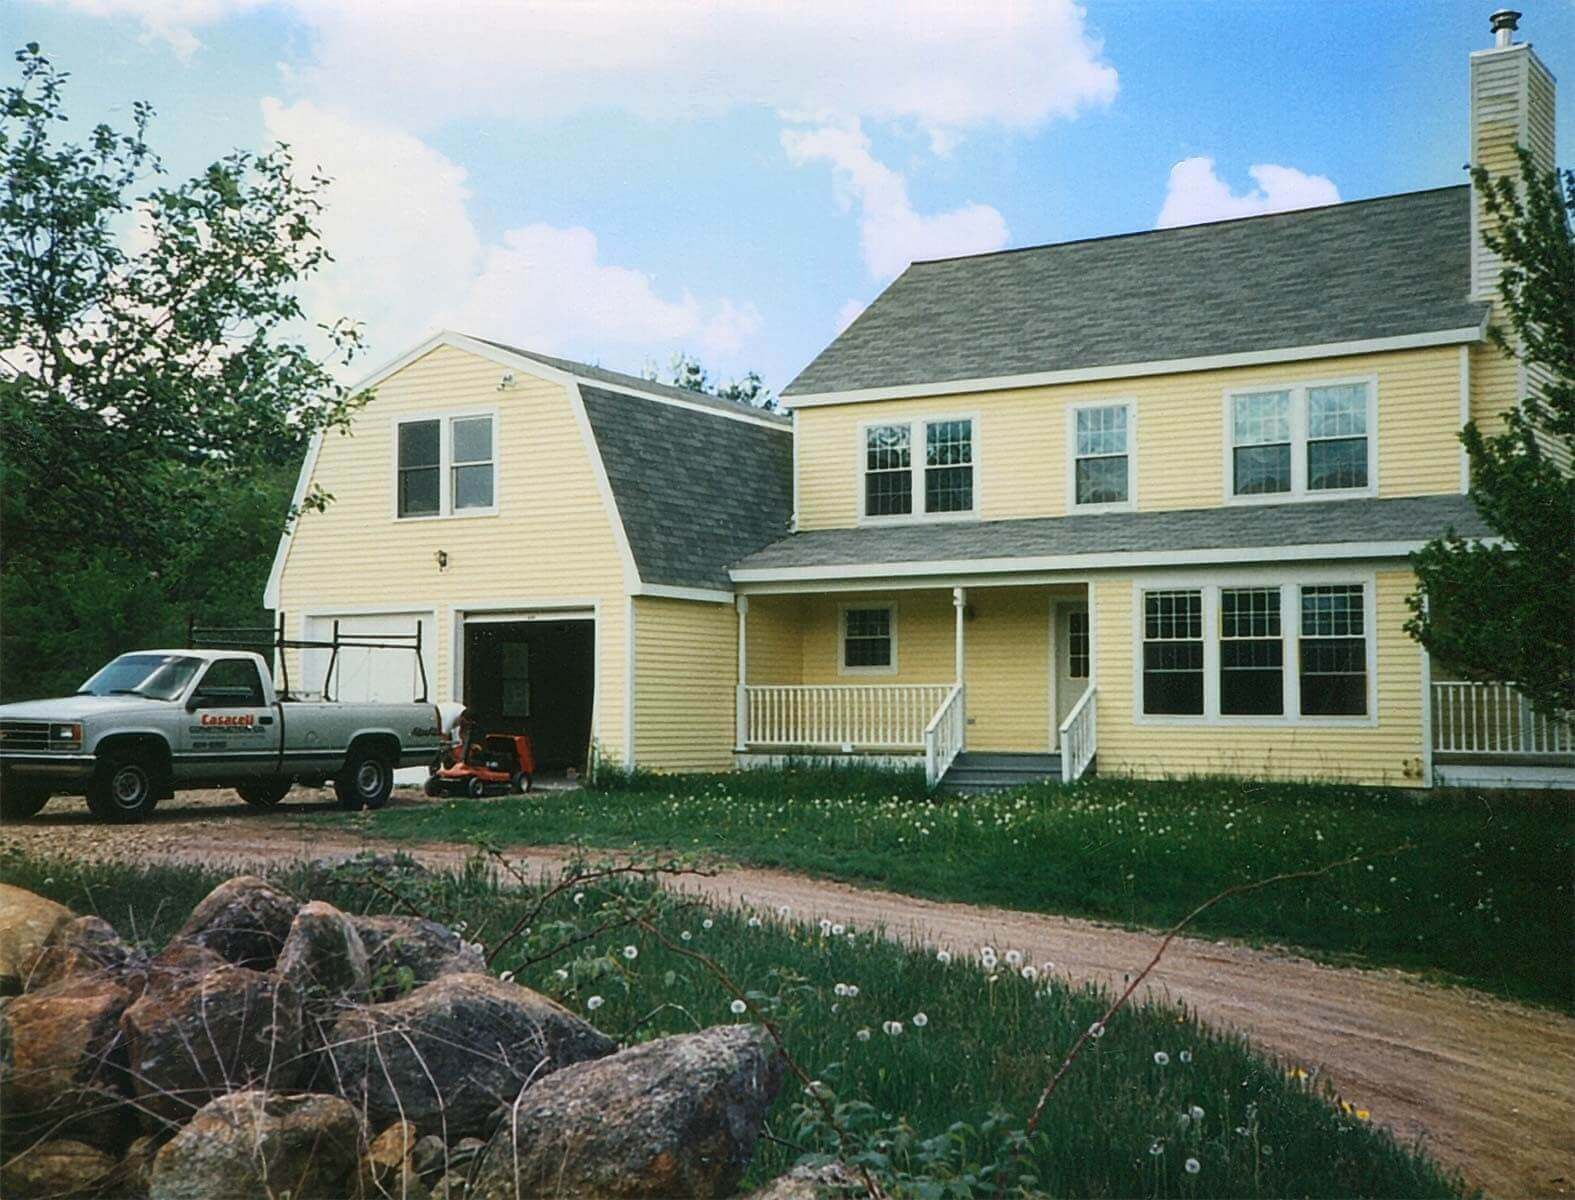 Two-story home with yellow siding and two front porches. Two car garage with second level storage and windows.